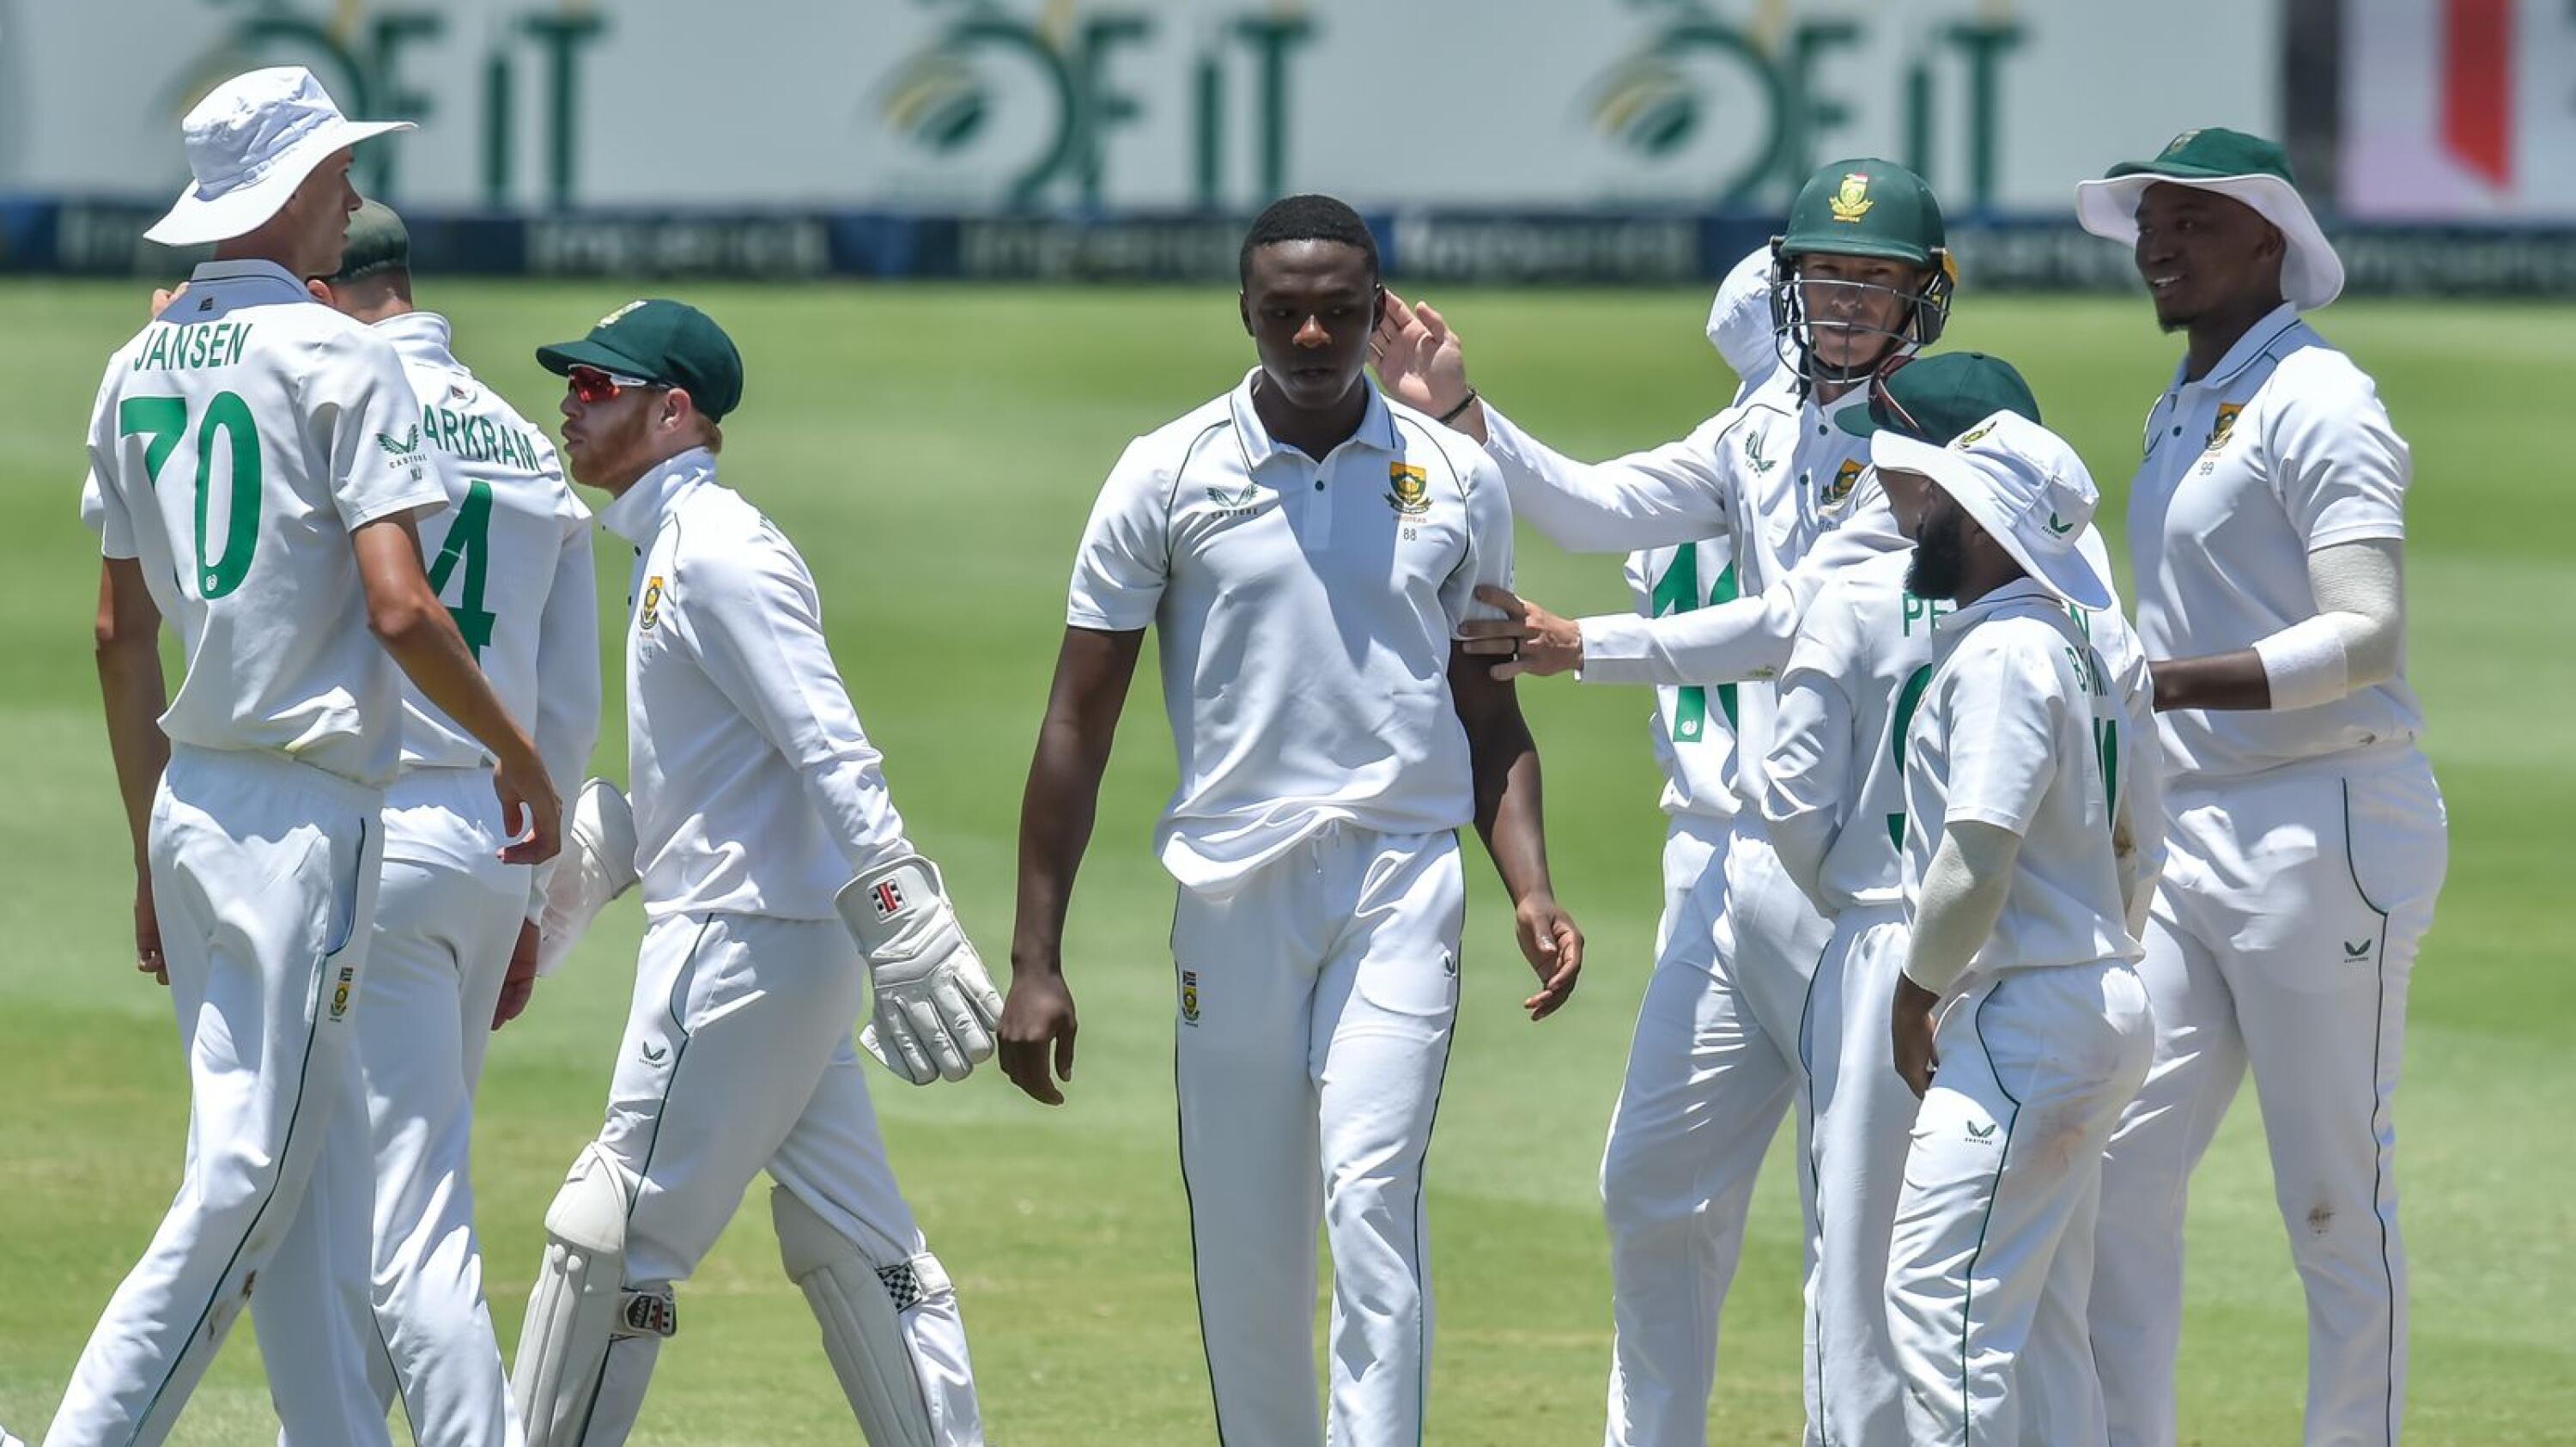 South Africa’s Kagiso Rabada celebrates with team mates after picking up a wicket during day 3 of the 2nd Test match against India at the Wanderers in Johannesburg on Wednesday